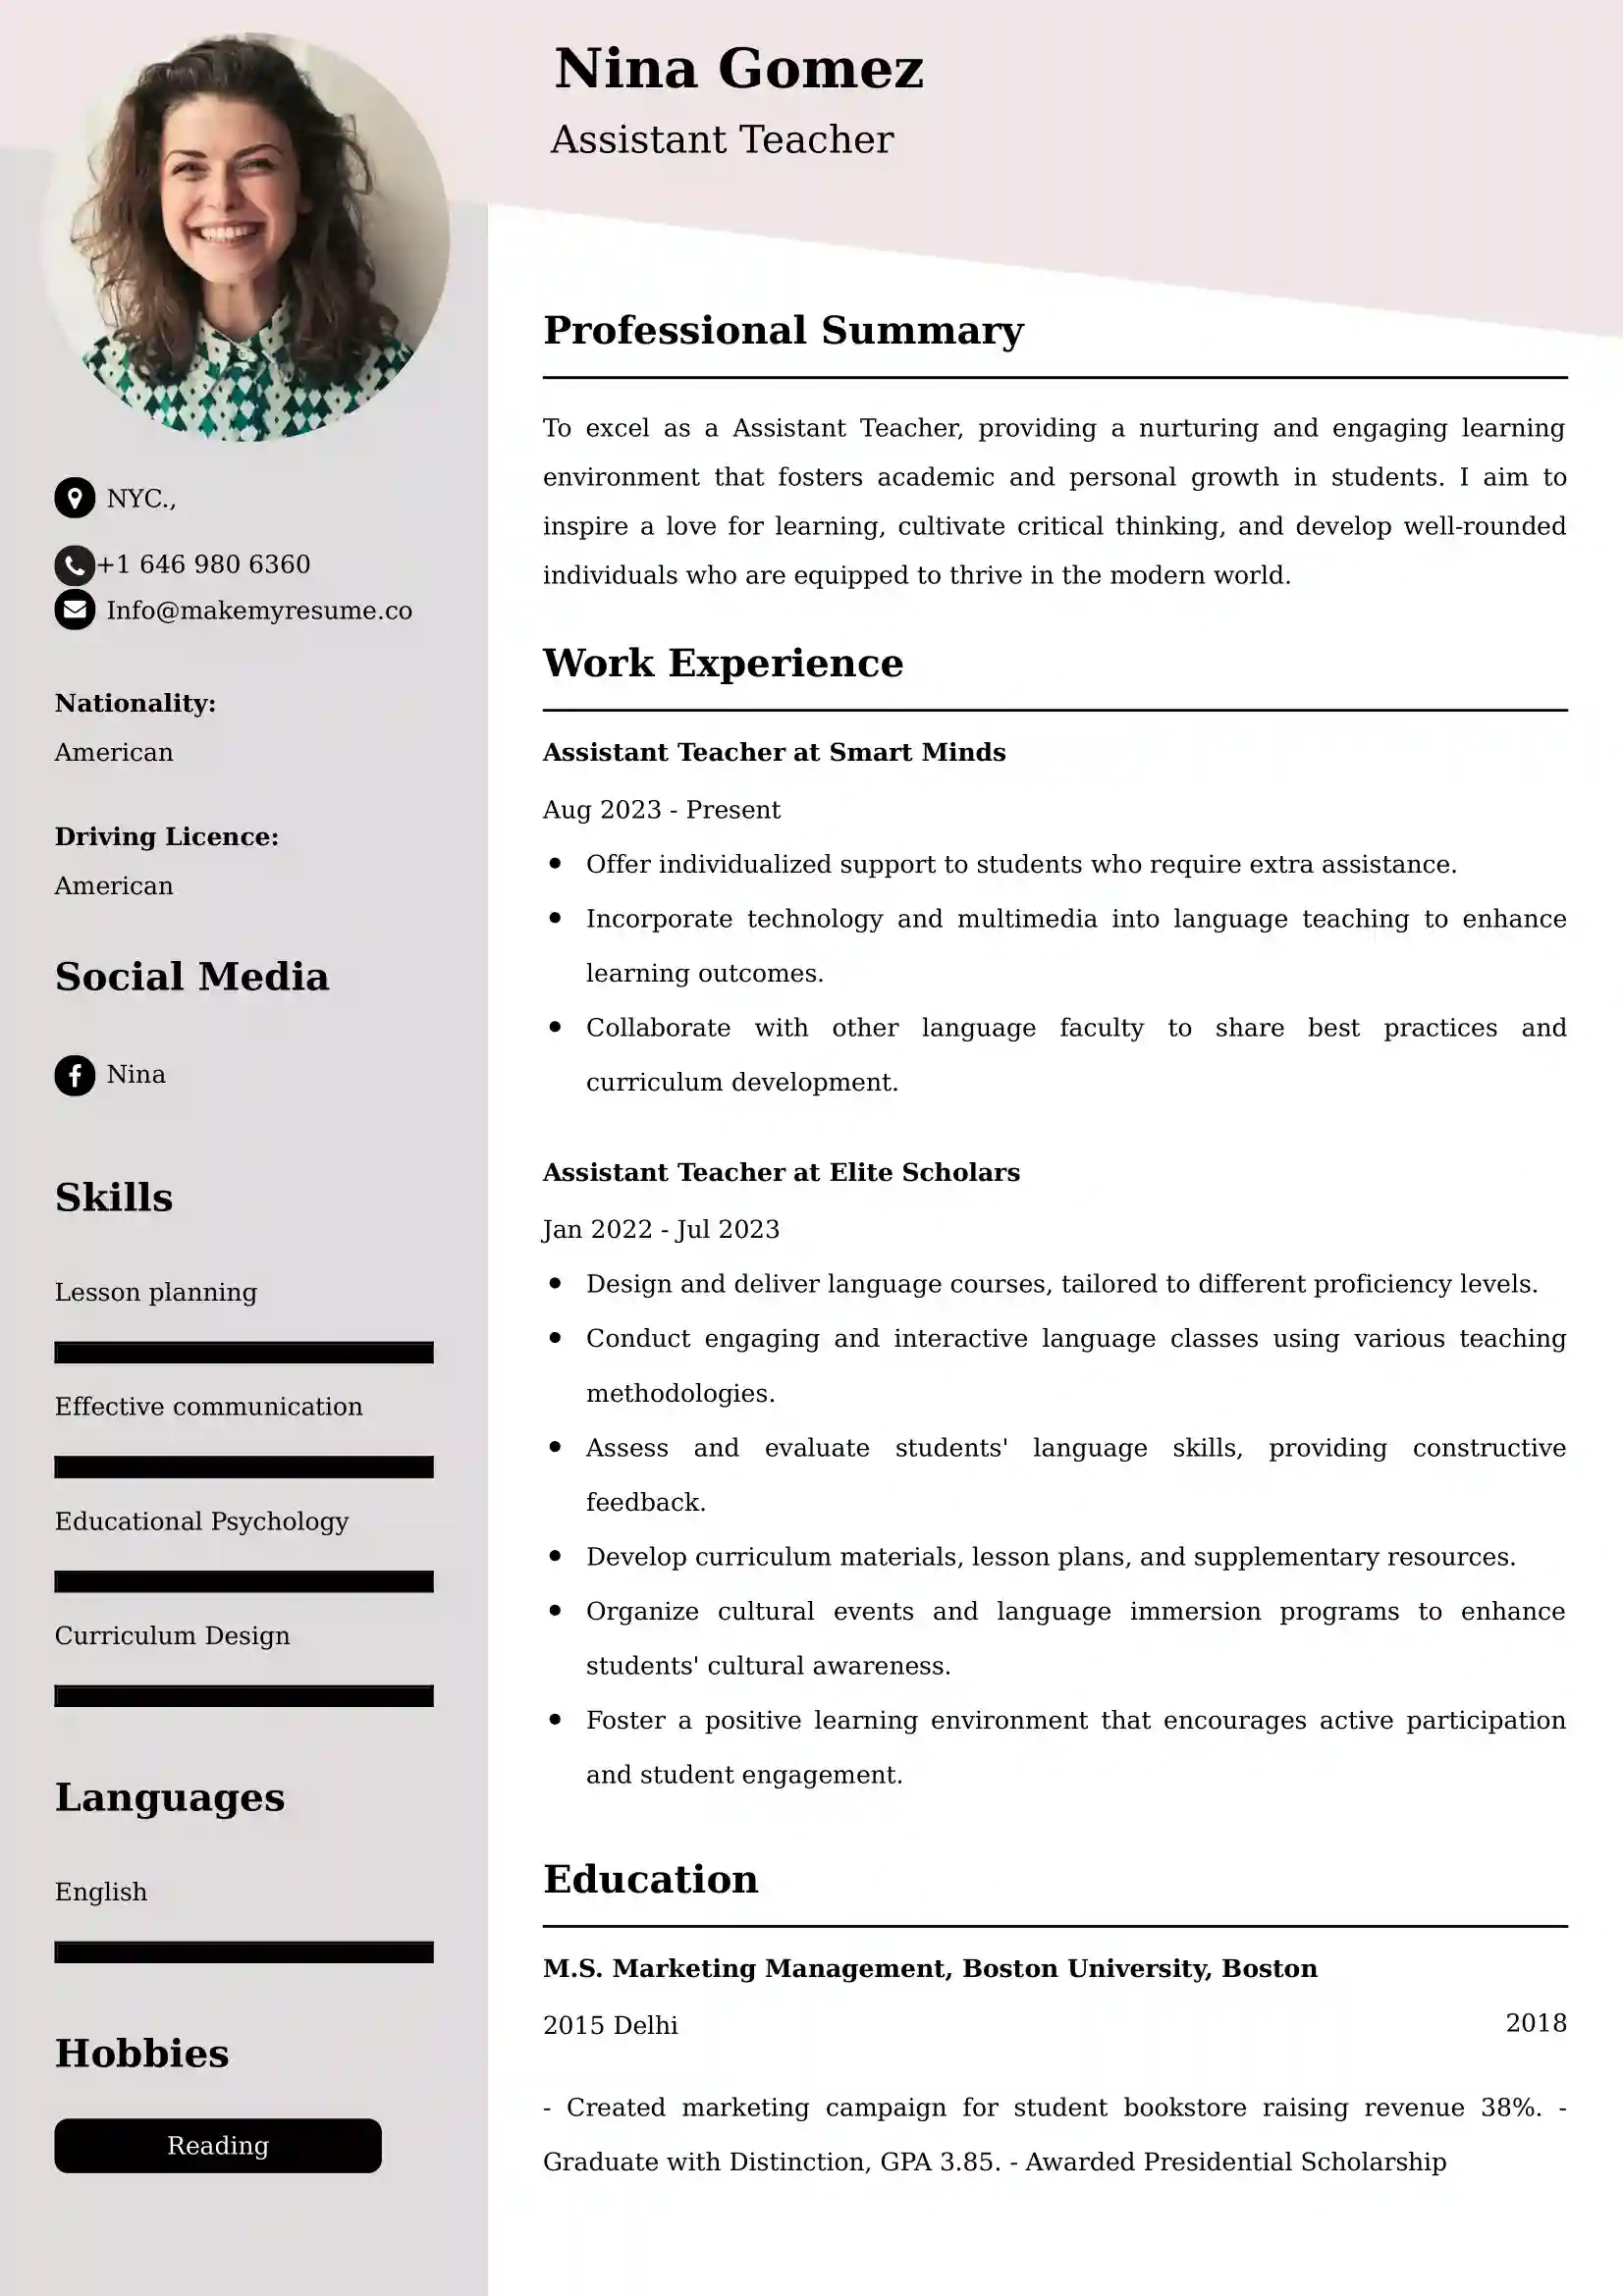 Teaching Resume Examples | 45+ ATS-Ready Samples and Guide